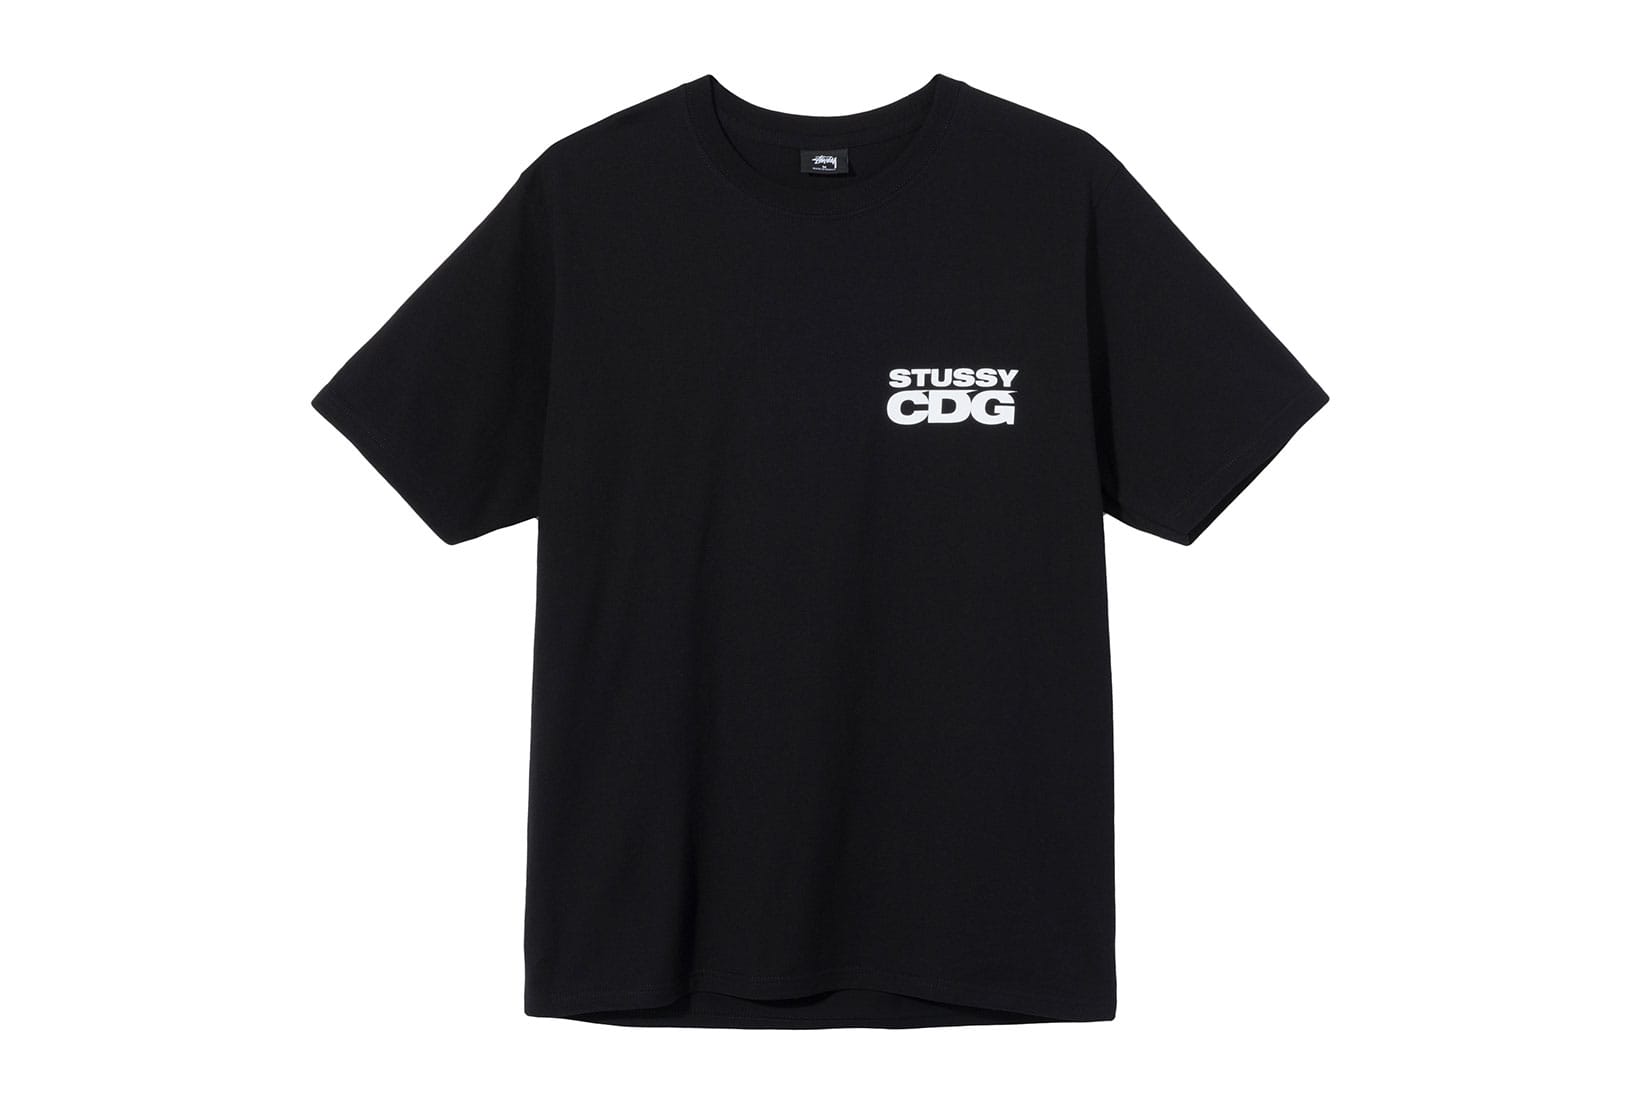 cdg shirt meaning